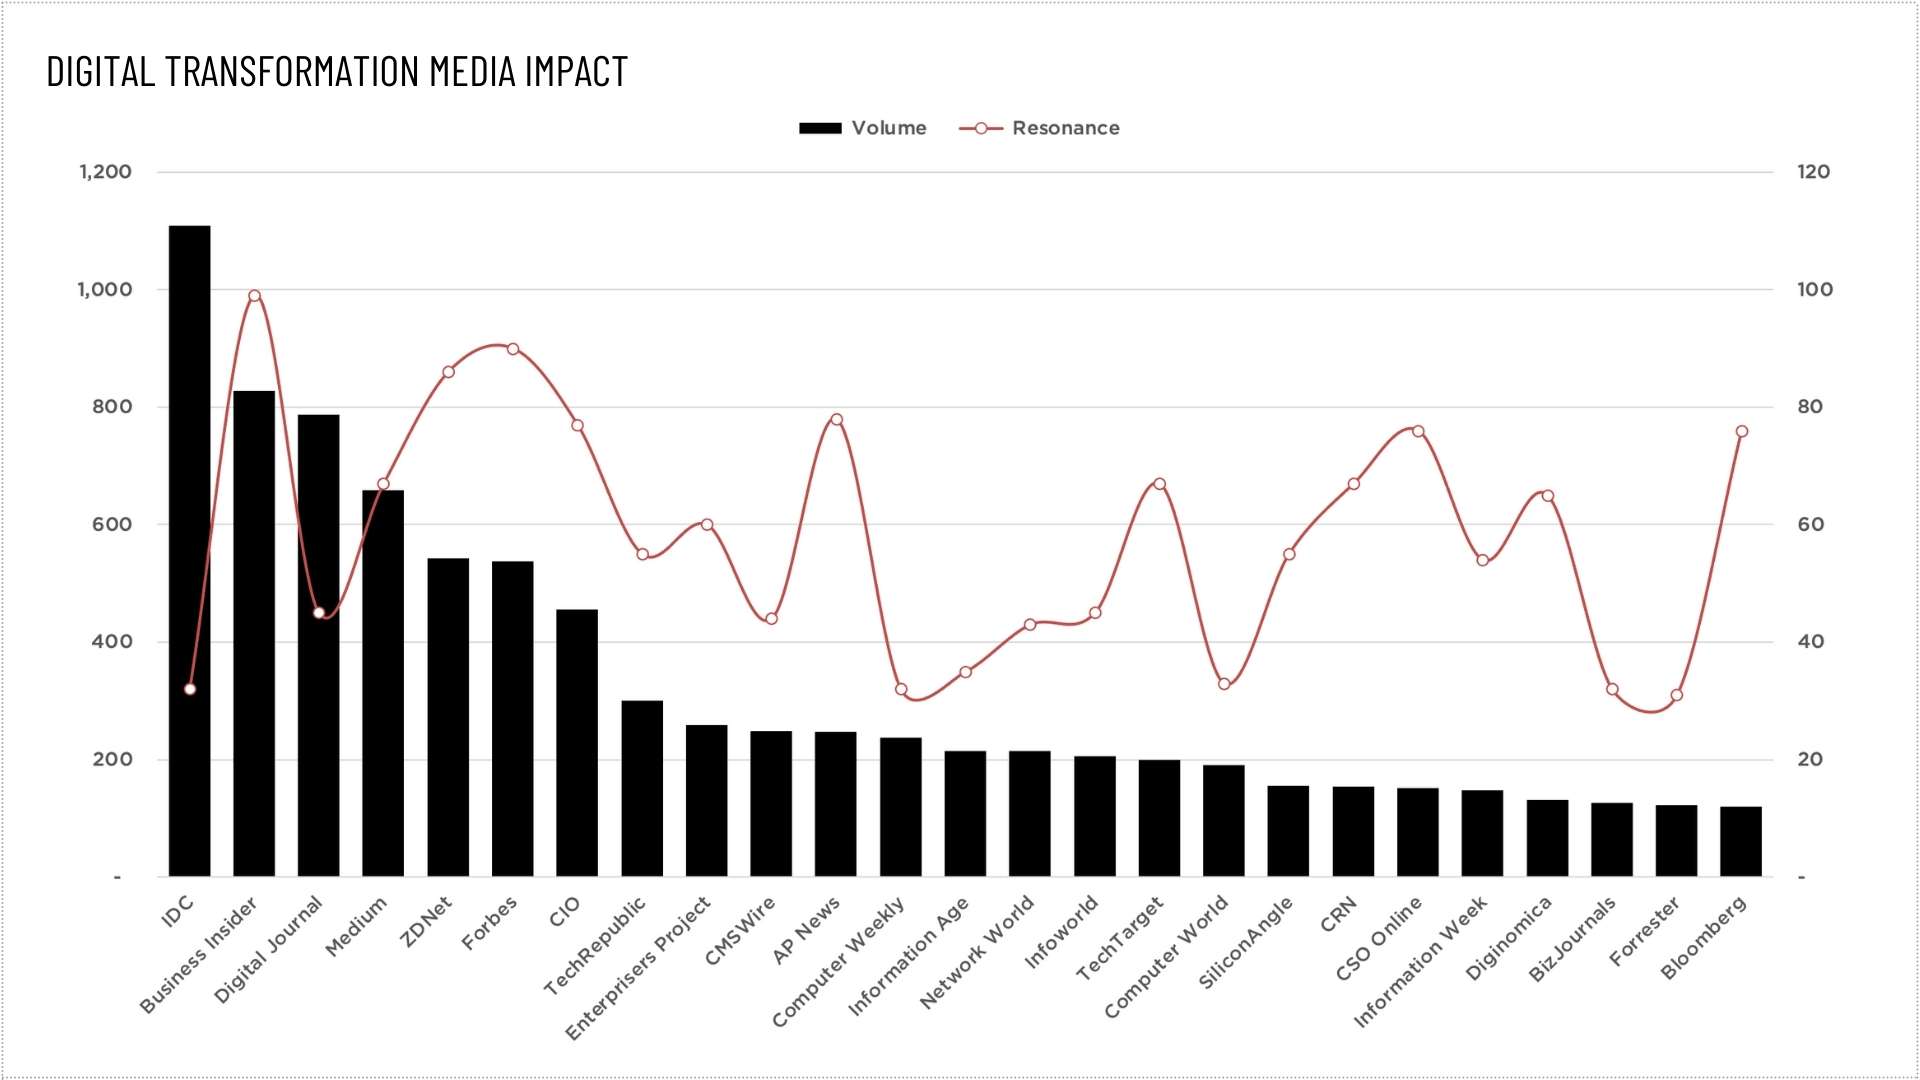 Digital Transformation showing the impact of media coverage